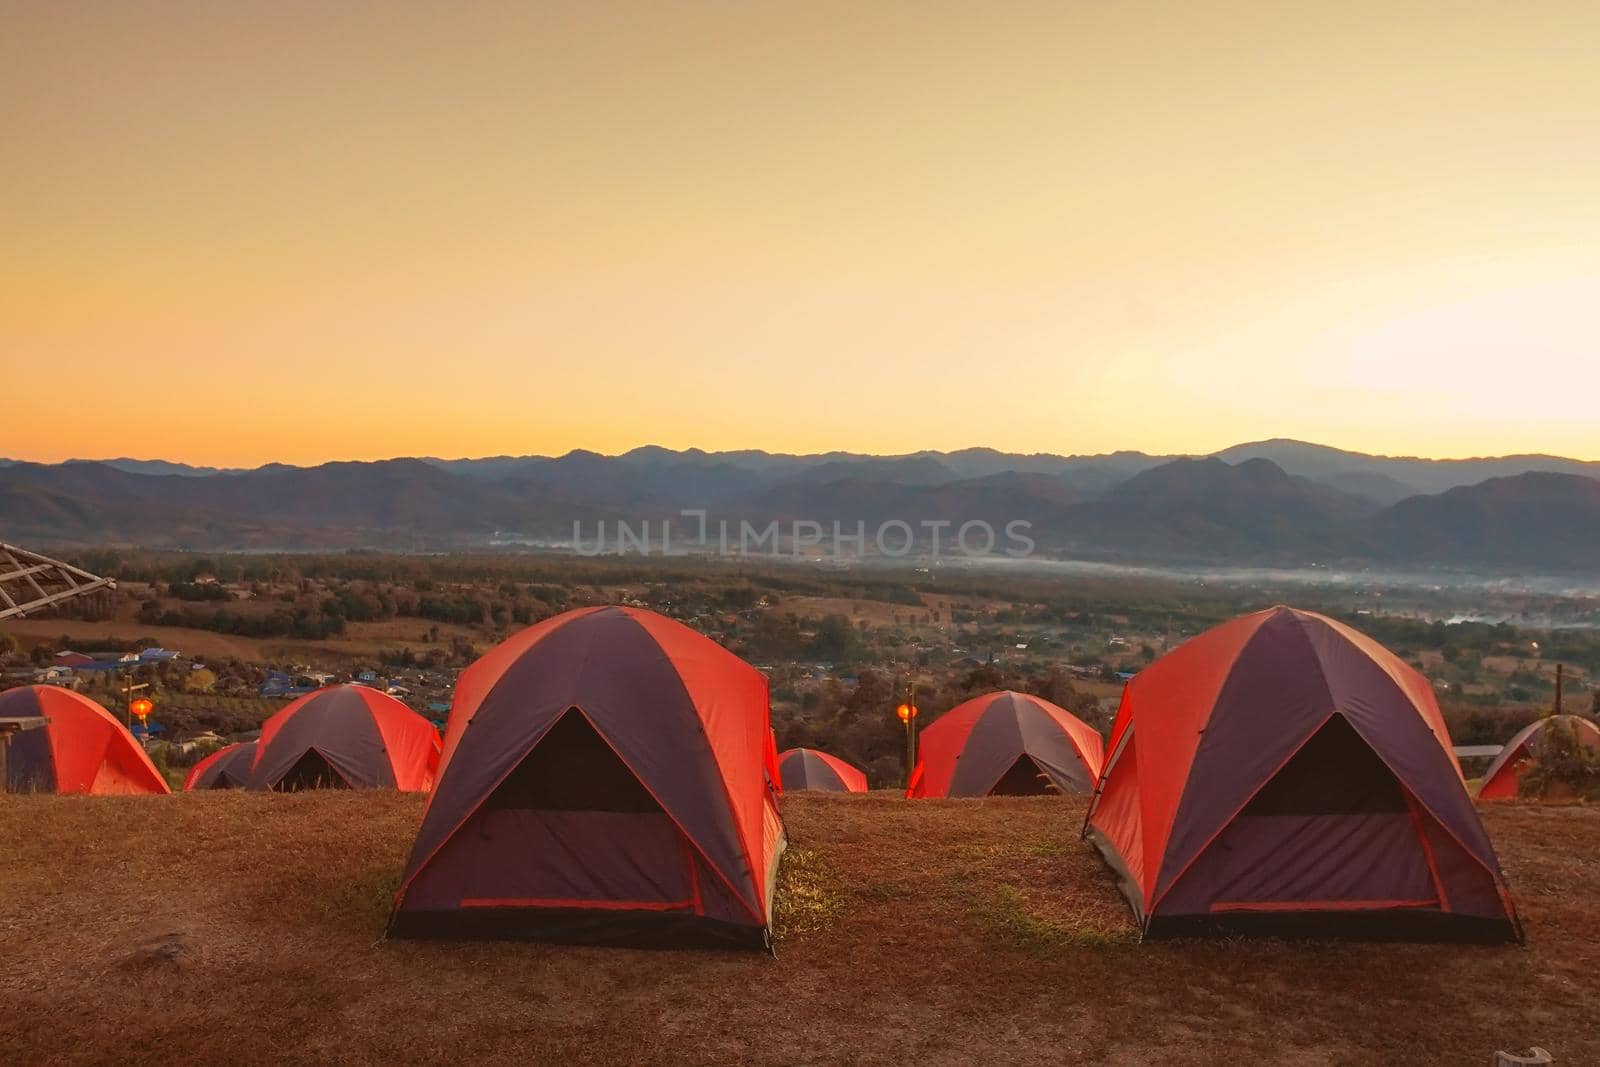 Sunrise and camping at Lai Viewpoint in Pai district, Mae Hong Son province, Thailand.